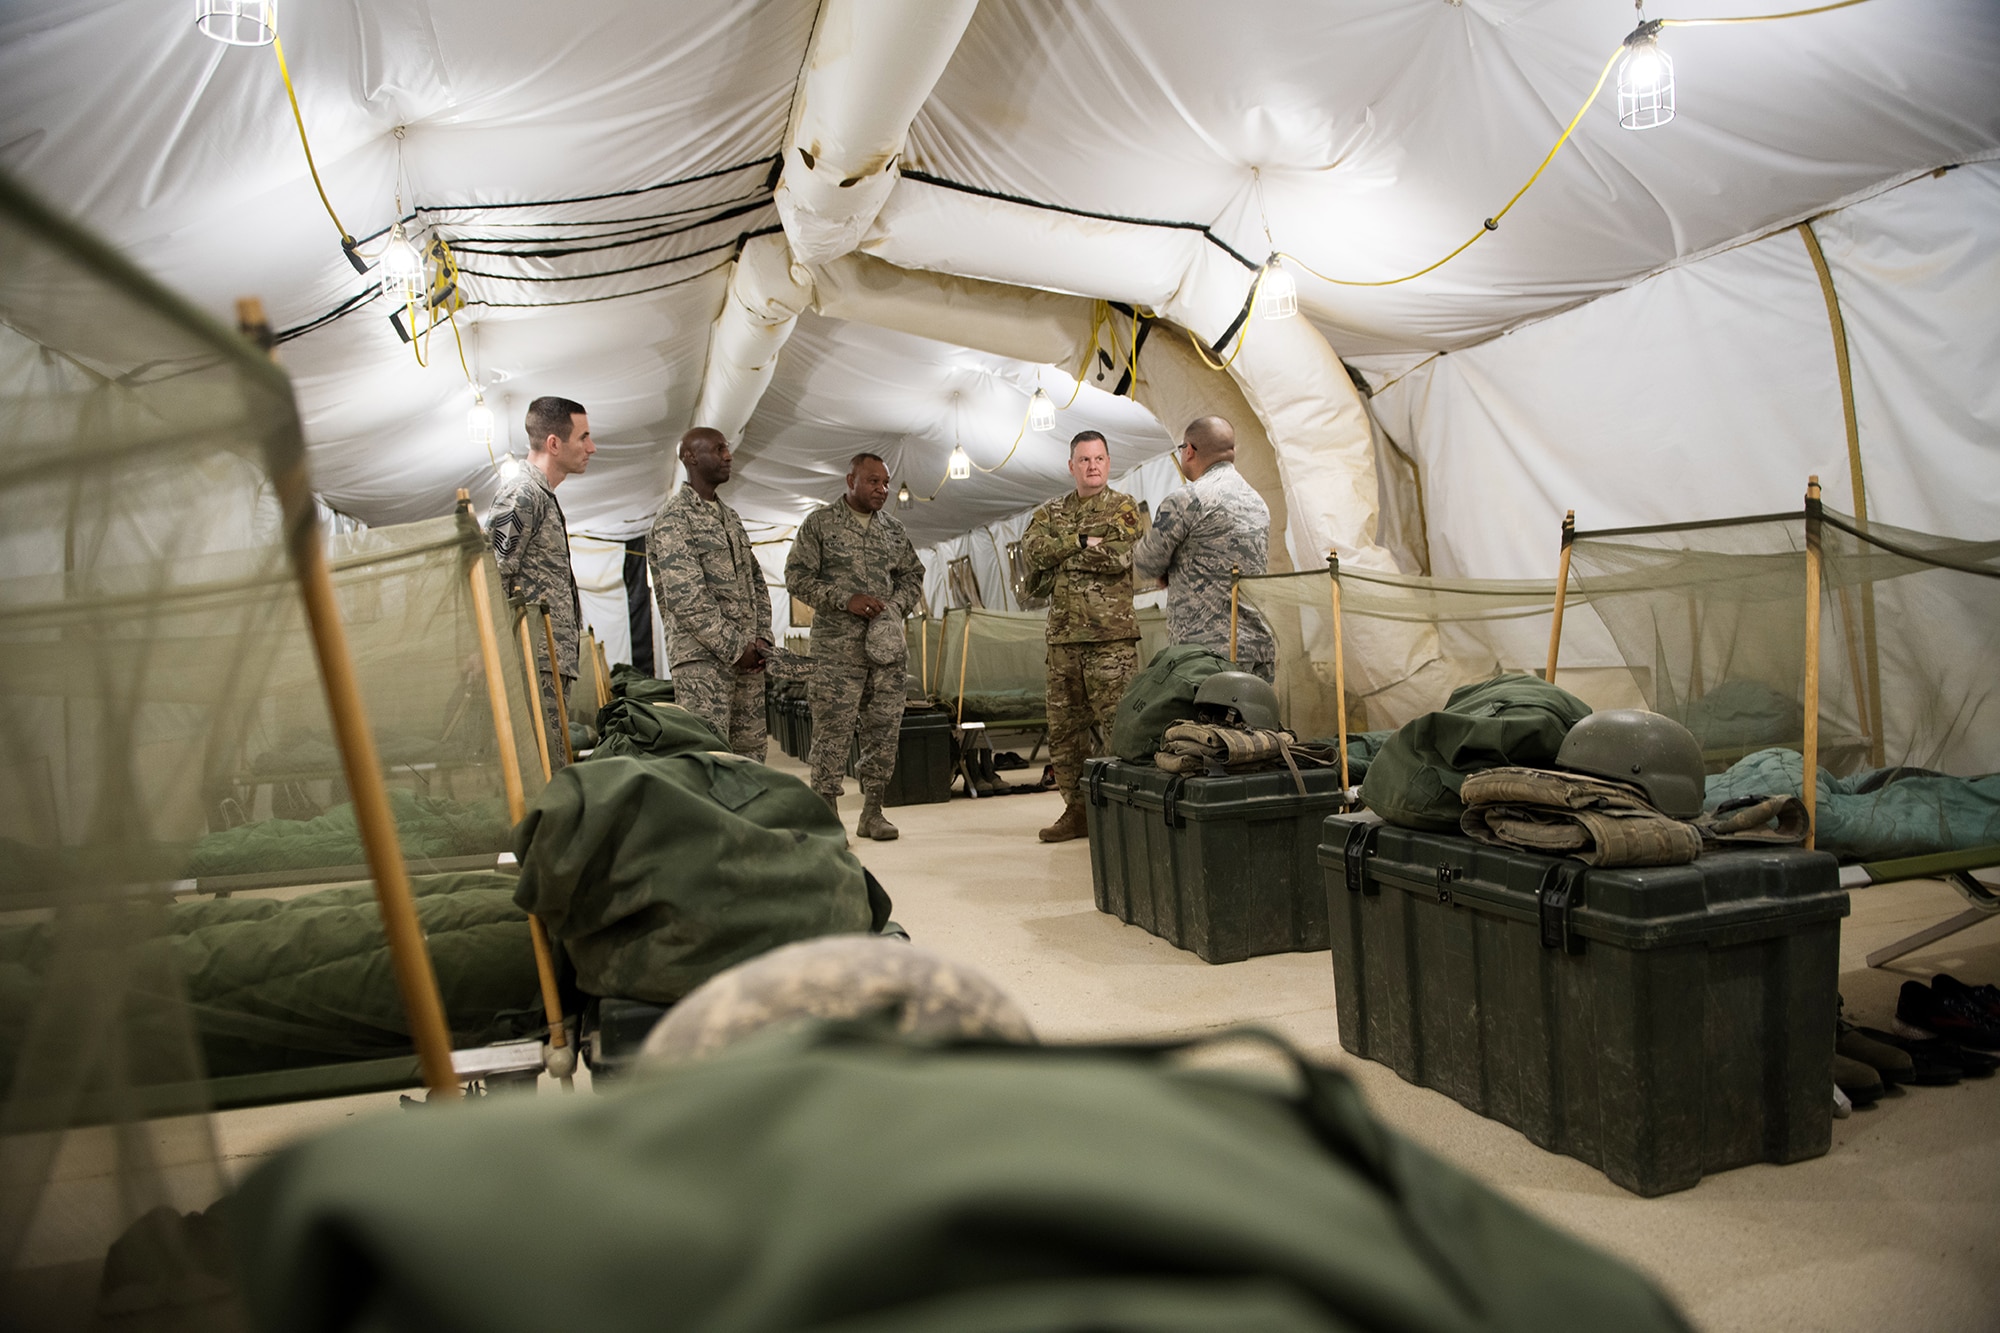 U.S. Air Force Lt. Gen. Brad Webb, commander of Air Education and Training Command (AETC), tours Basic Expeditionary Airmen Skills Training Aug. 1, 2019, at Joint Base San Antonio-Lackland, Texas